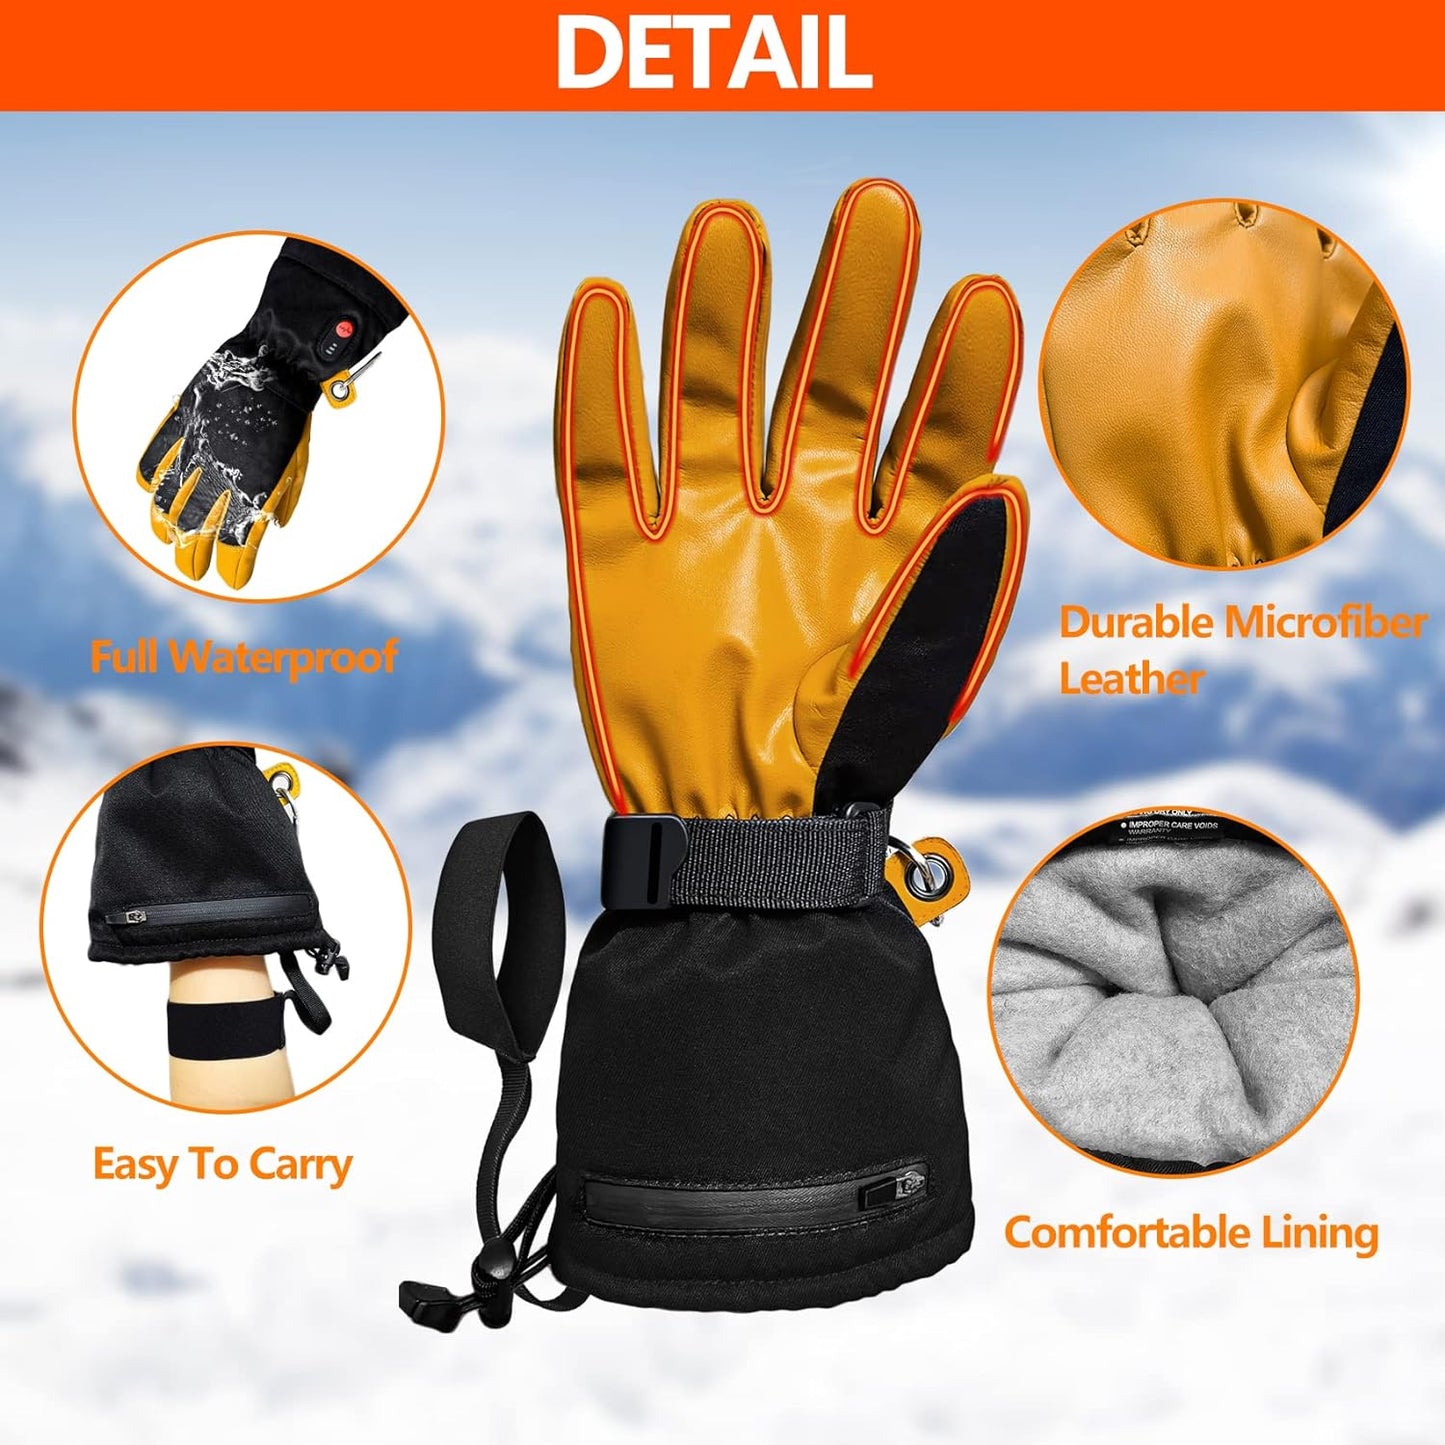 Hsility Heated Gloves for Men Rechargeable Automatic Thermostat Motorcycle Gloves Waterproof for Hiking /Fishing/ Skiing/ Camping